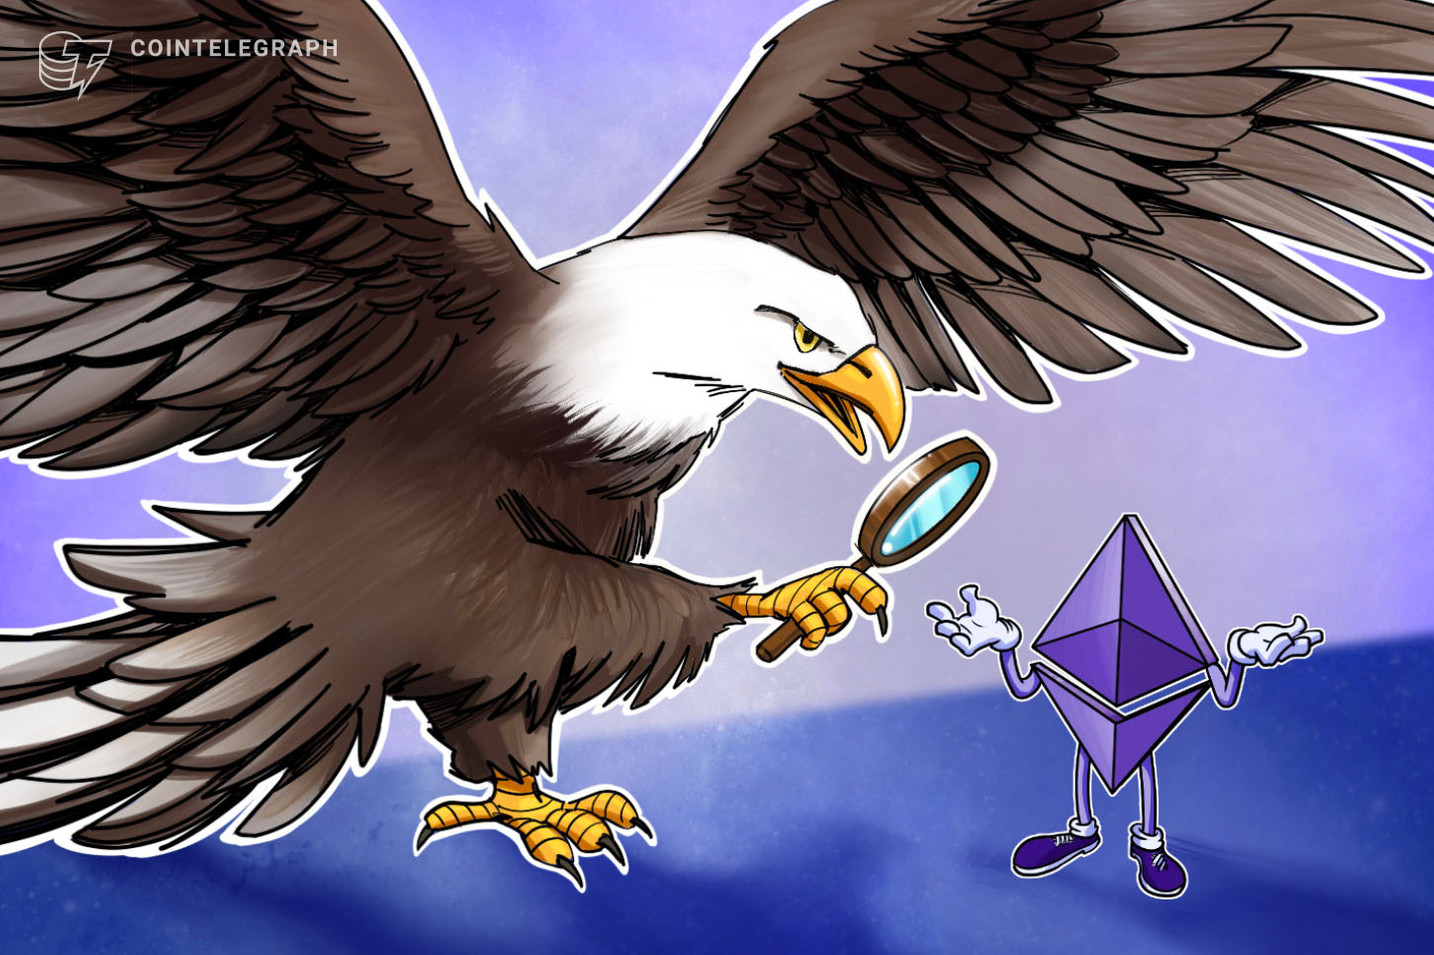 SEC Expresses Concern Over 'Ether is Not a Security' Statement in Unsealed Hinman Documents